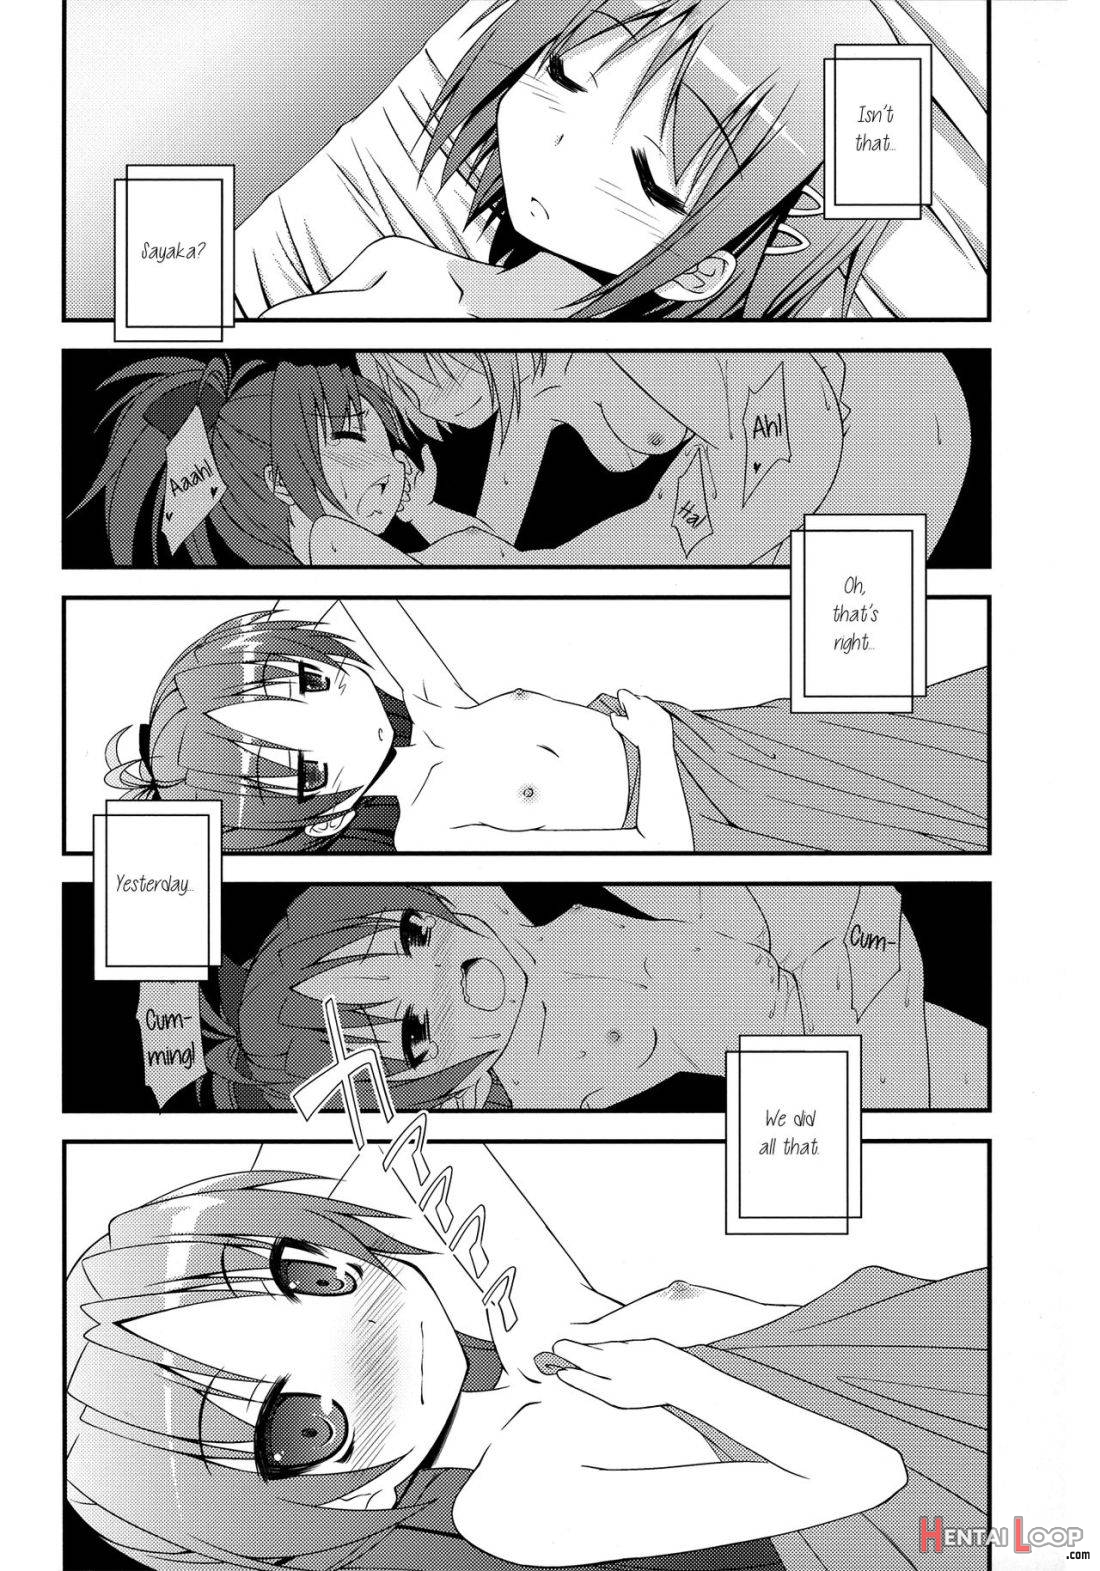 Lovely Girls’ Lily Vol.1 page 3